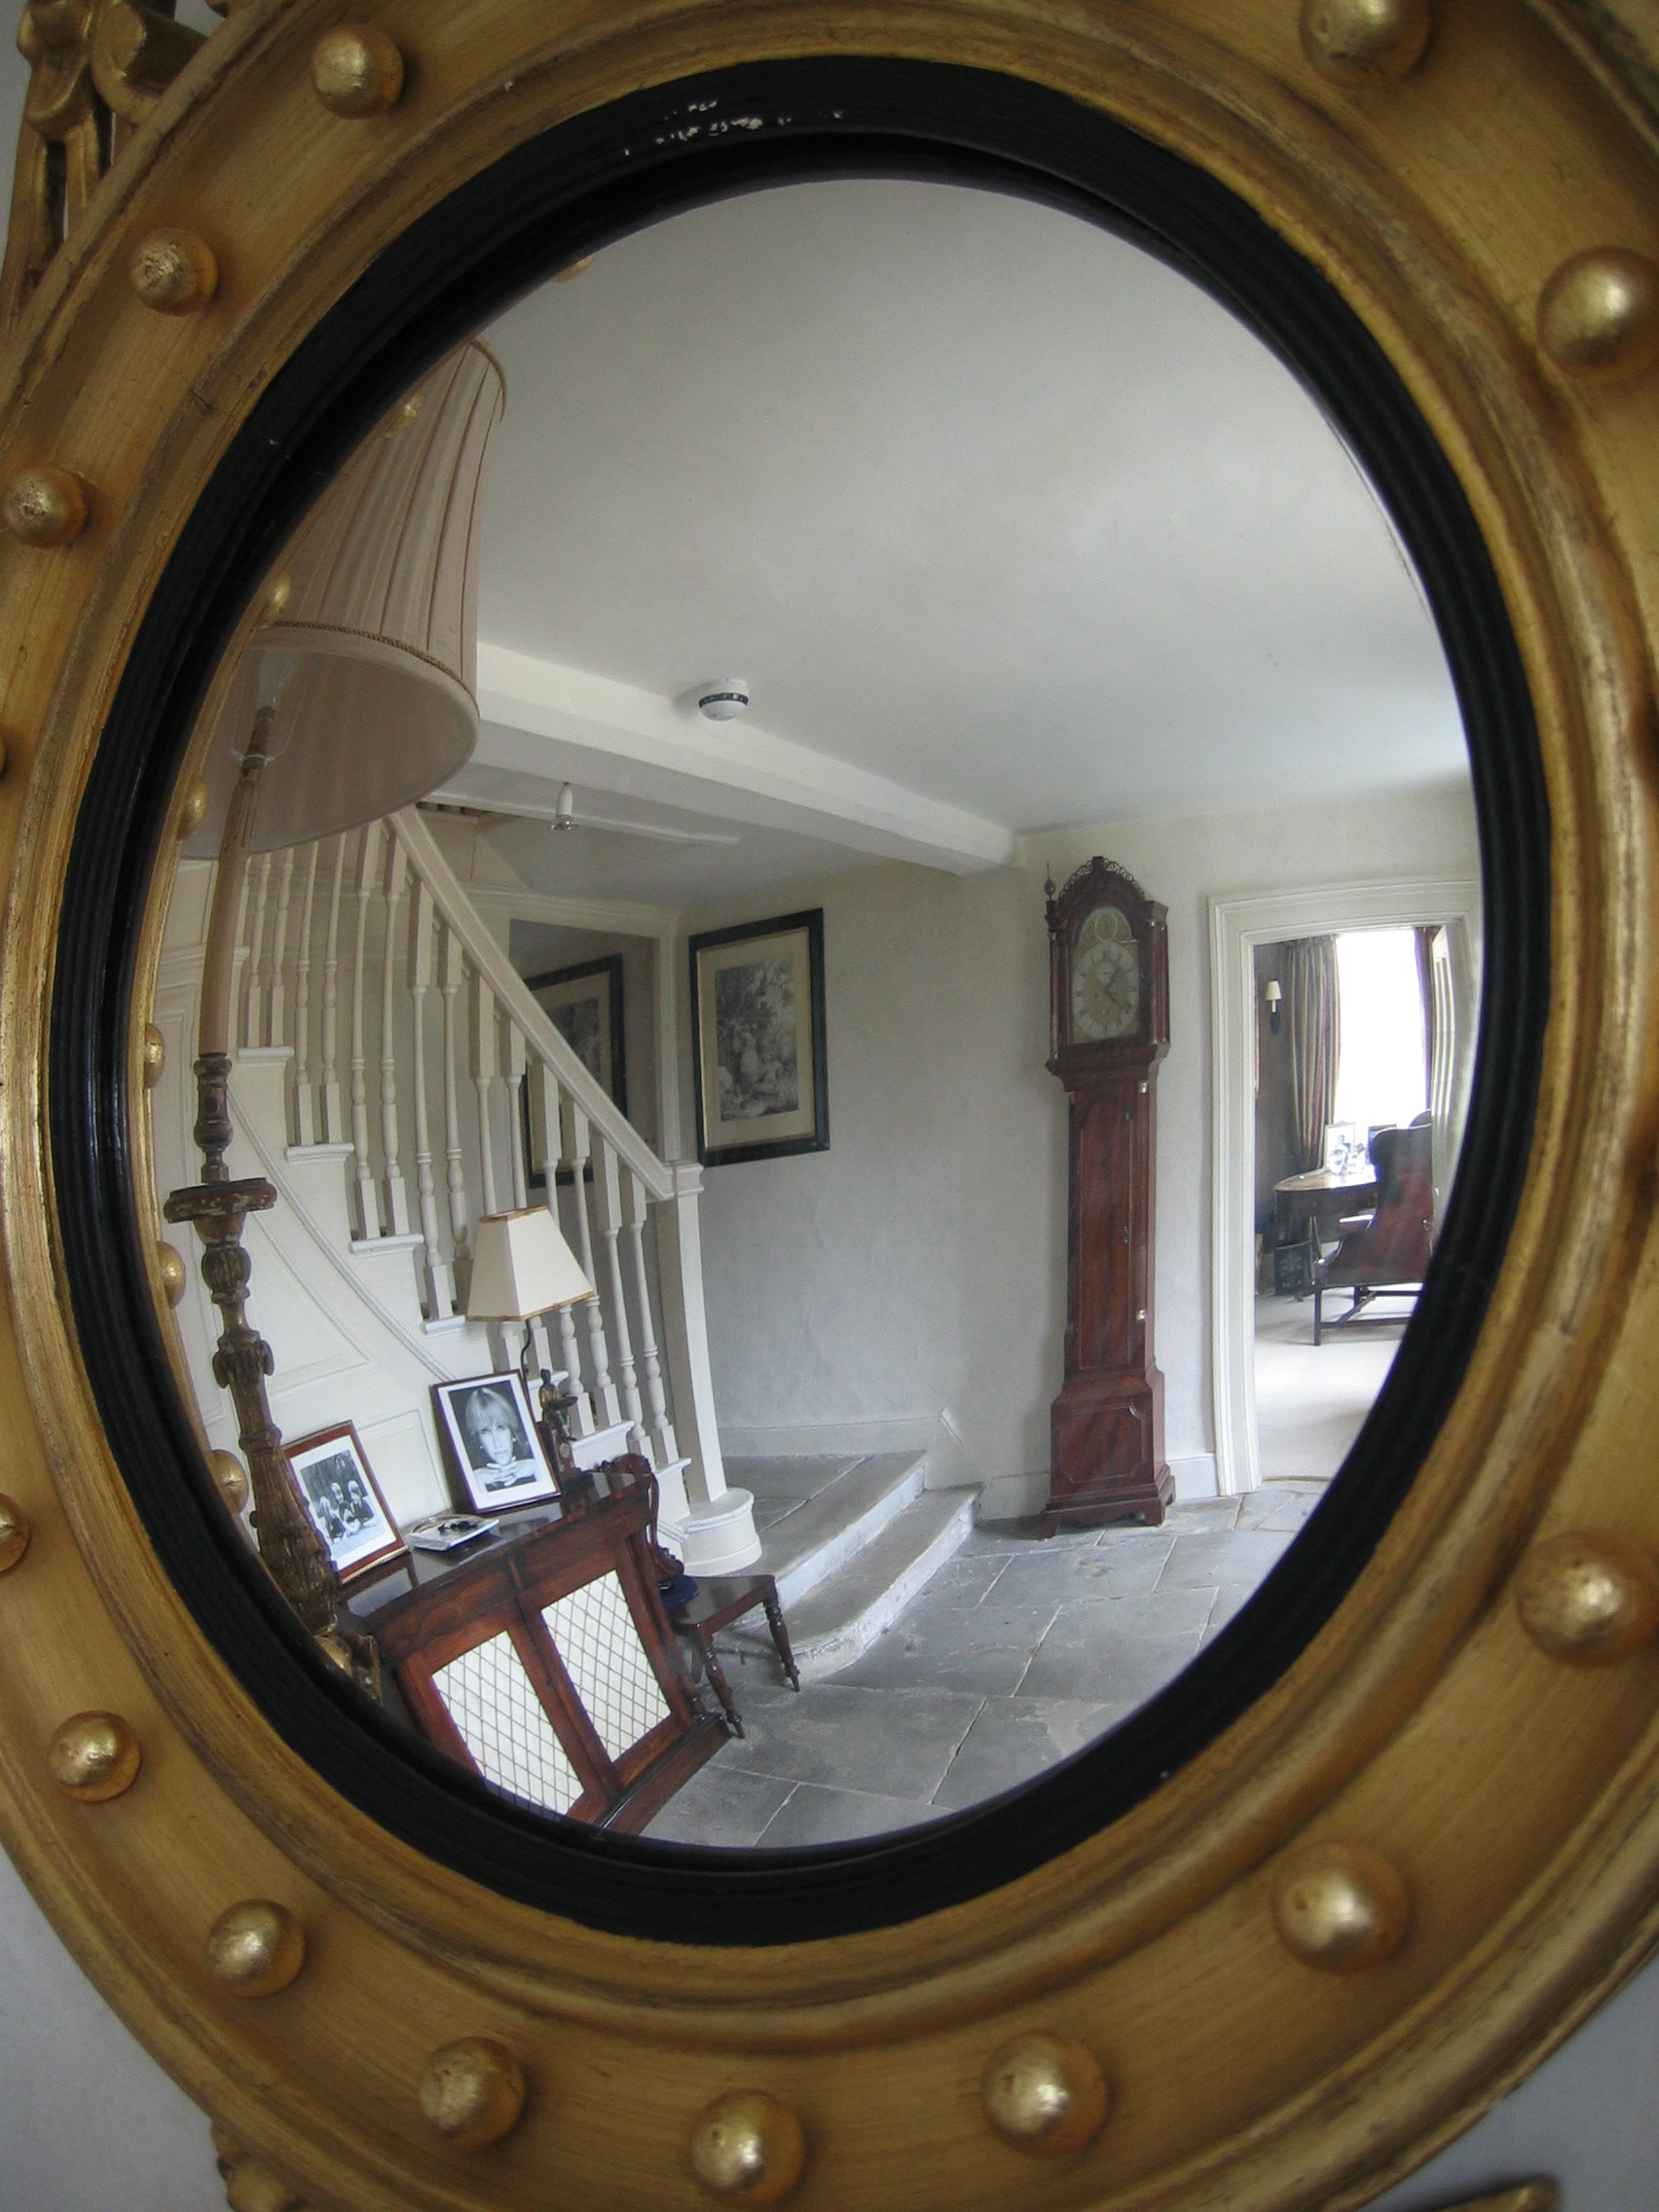 Antique flagstones and a stone washed specialist paint finish on the walls are reflected in the convex hall mirror.